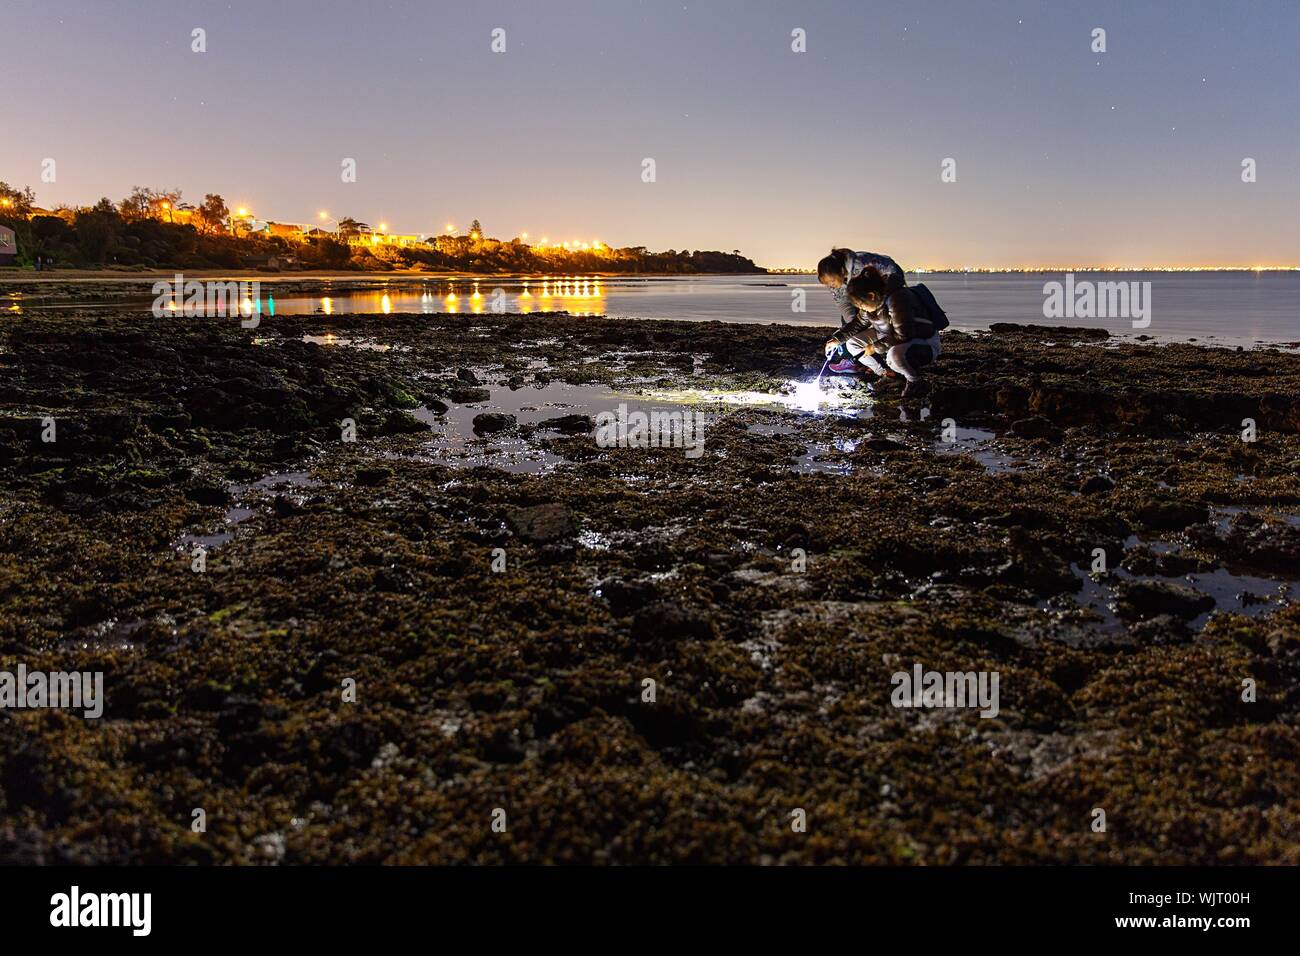 Women Researching On Rocky Shore At Night Stock Photo